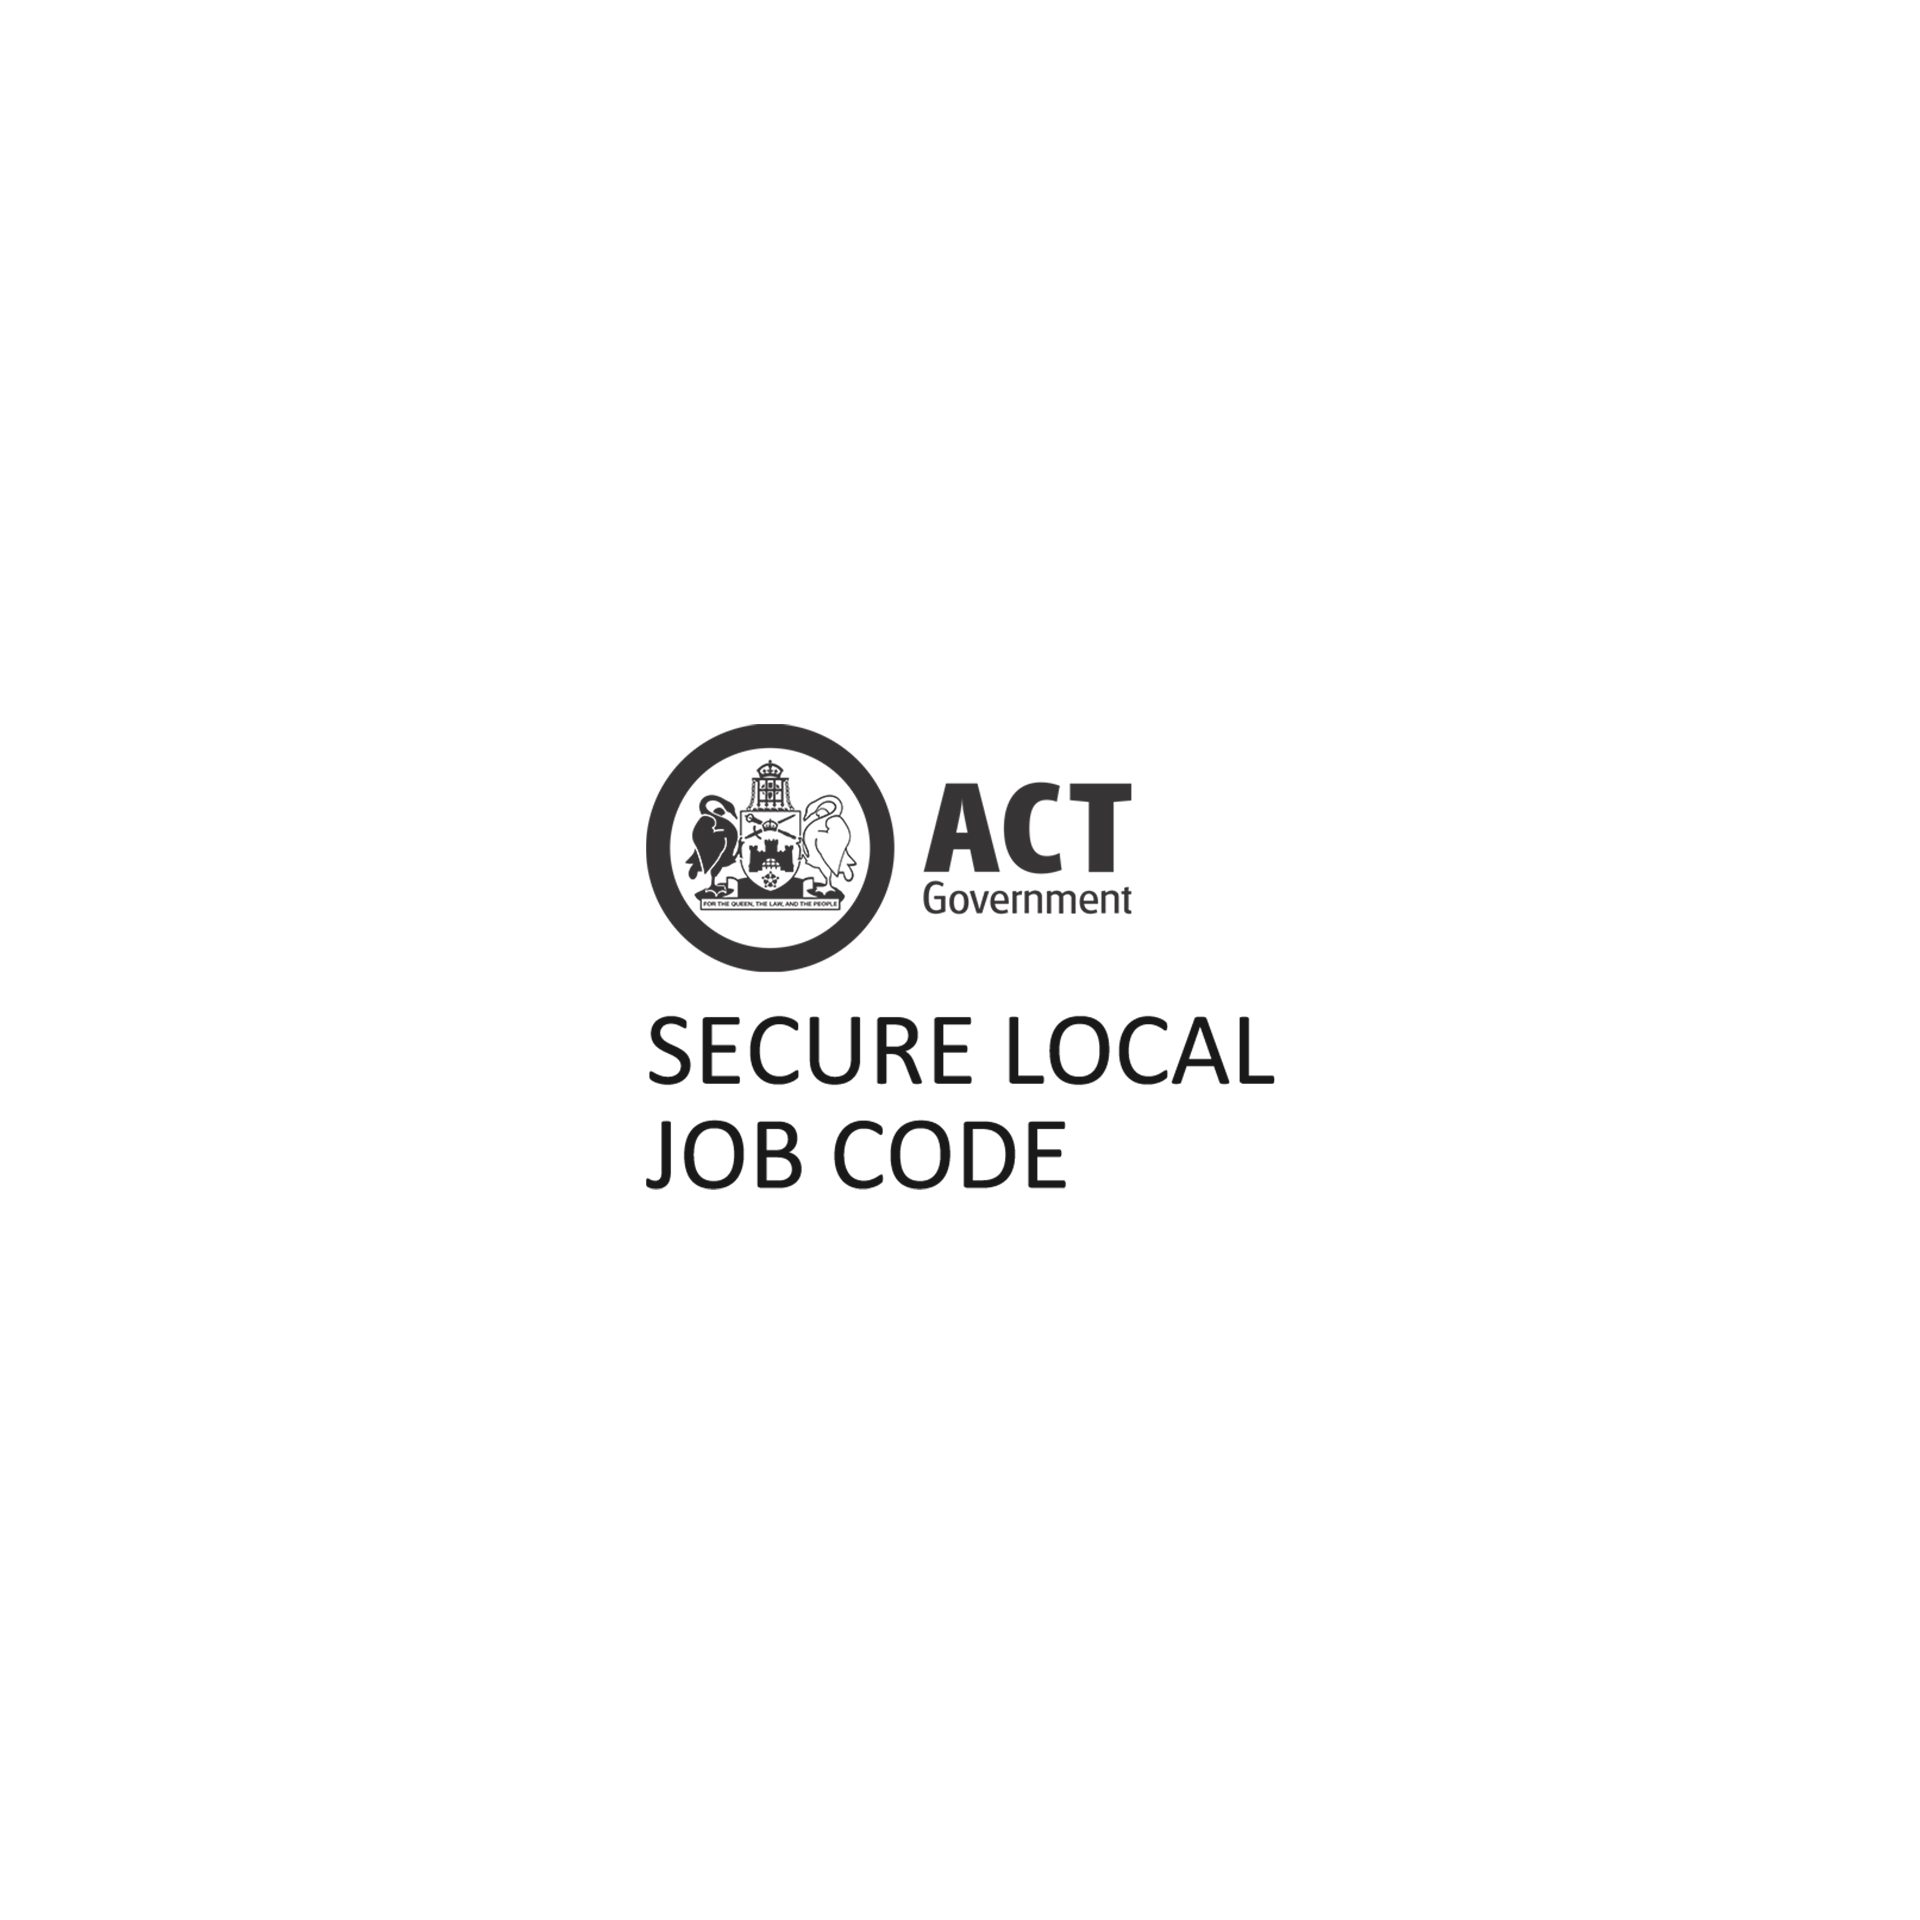 secure local ob code act government logo in black and white